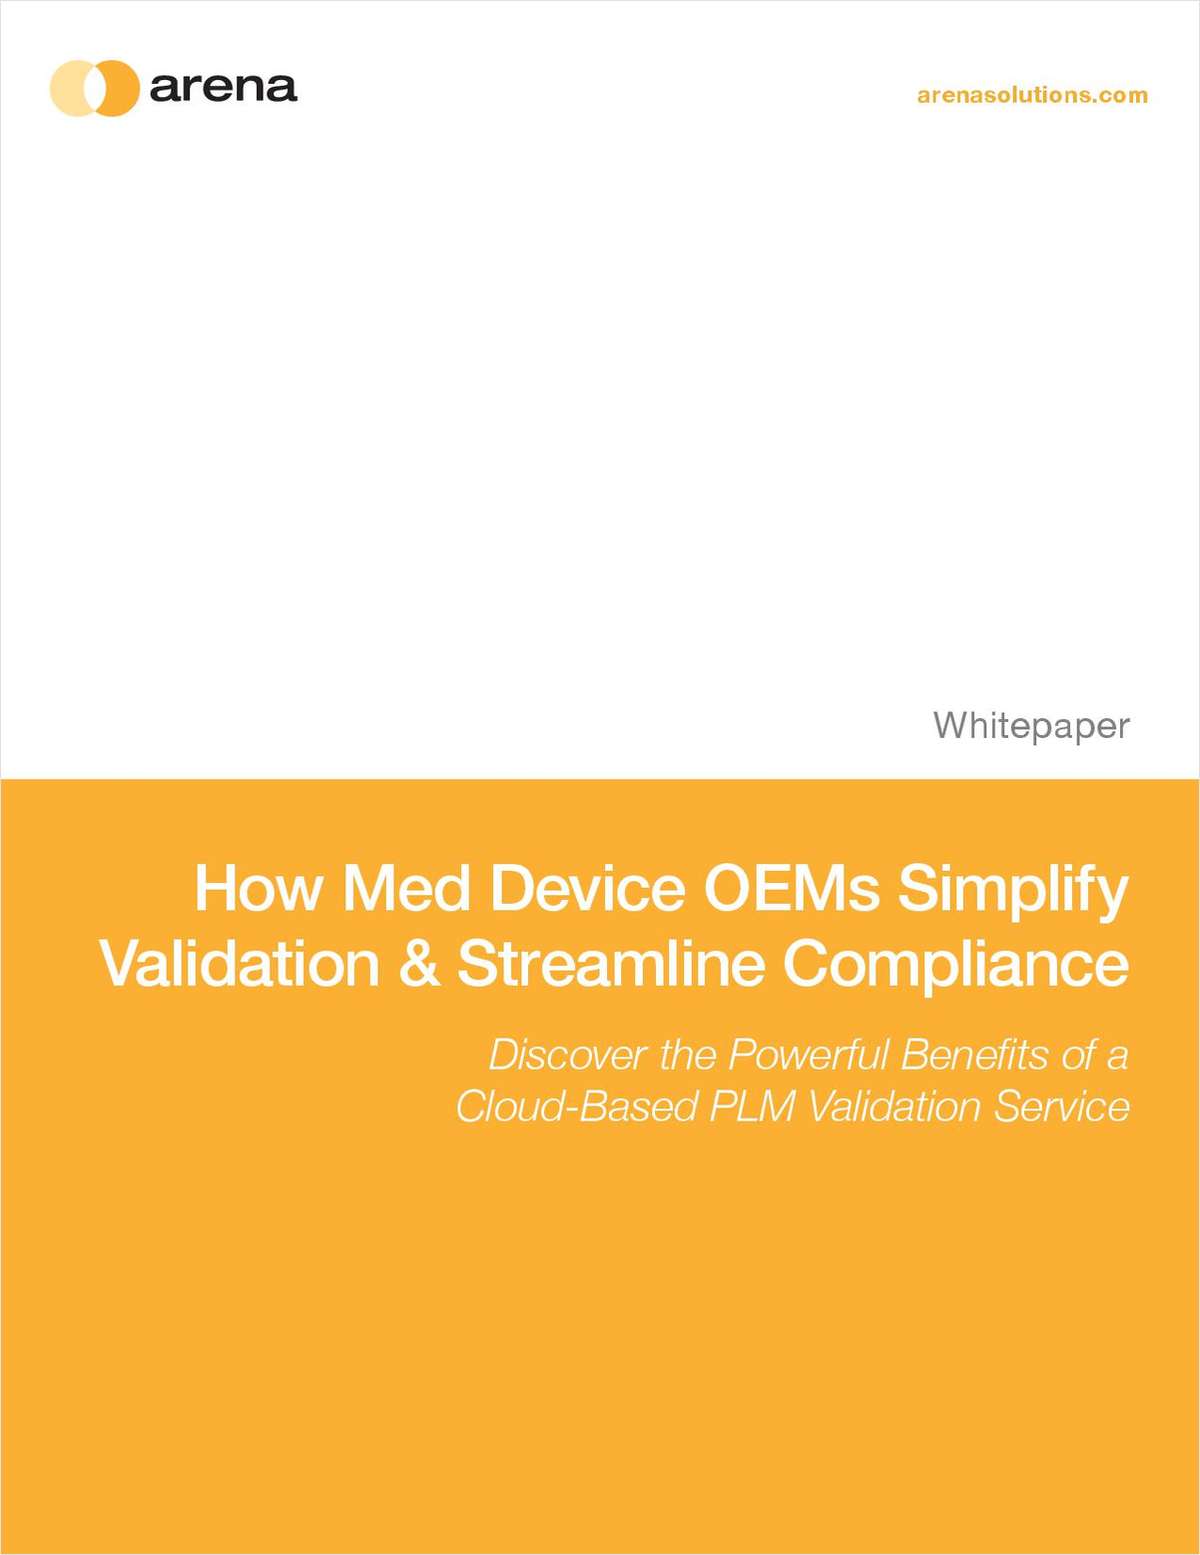 How Med Device OEMs Simplify Validation & Streamline Compliance